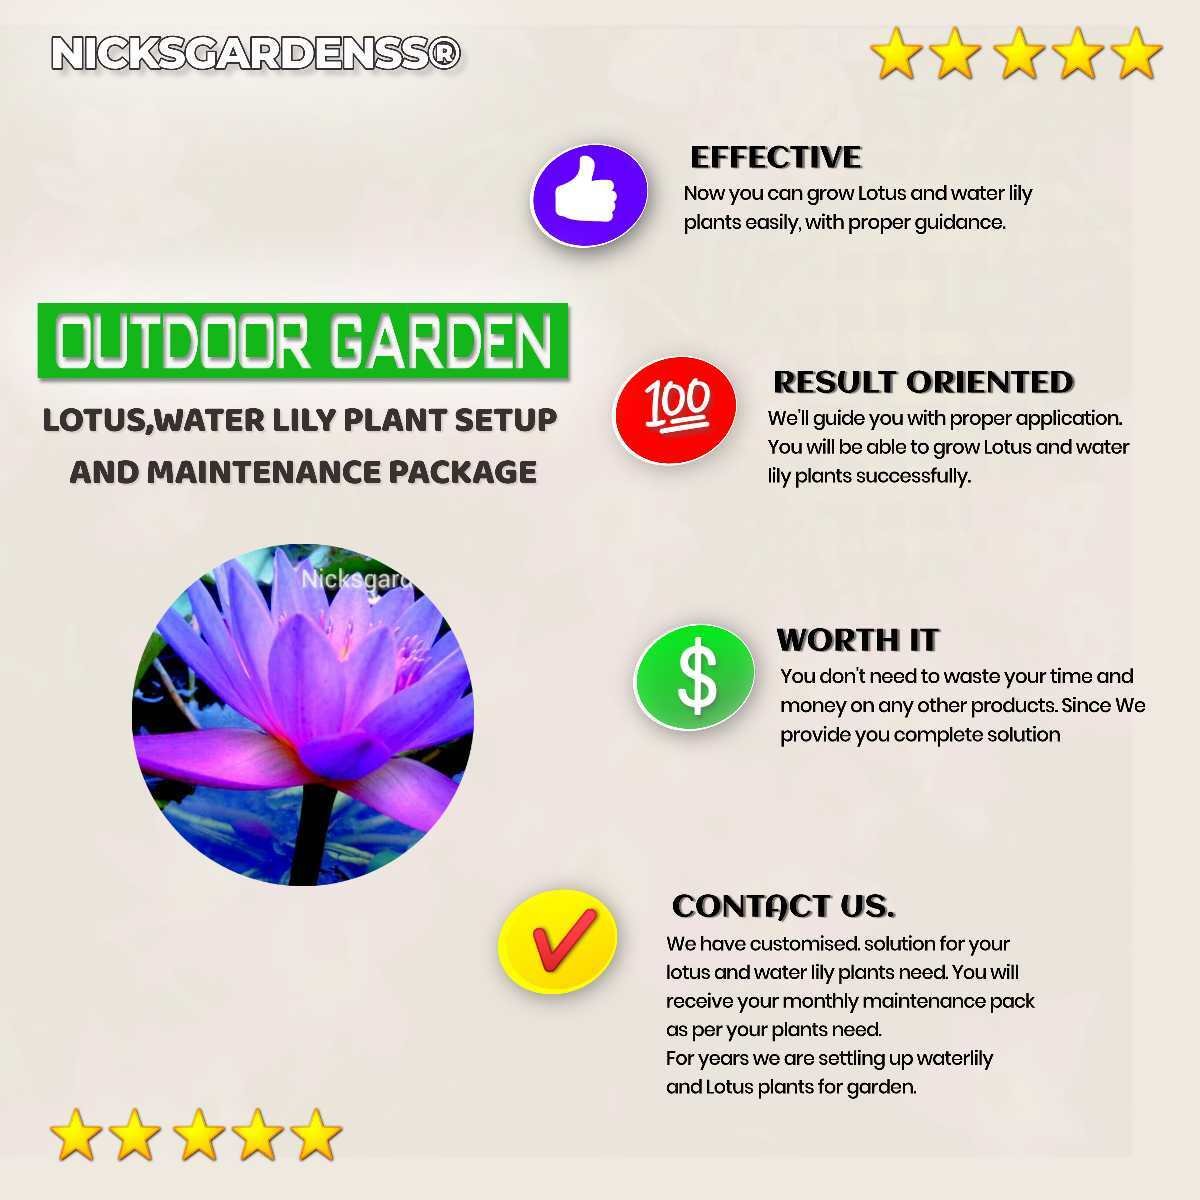 For Outdoor, Garden: Lotus, Water Lily Setup And maintenance Package